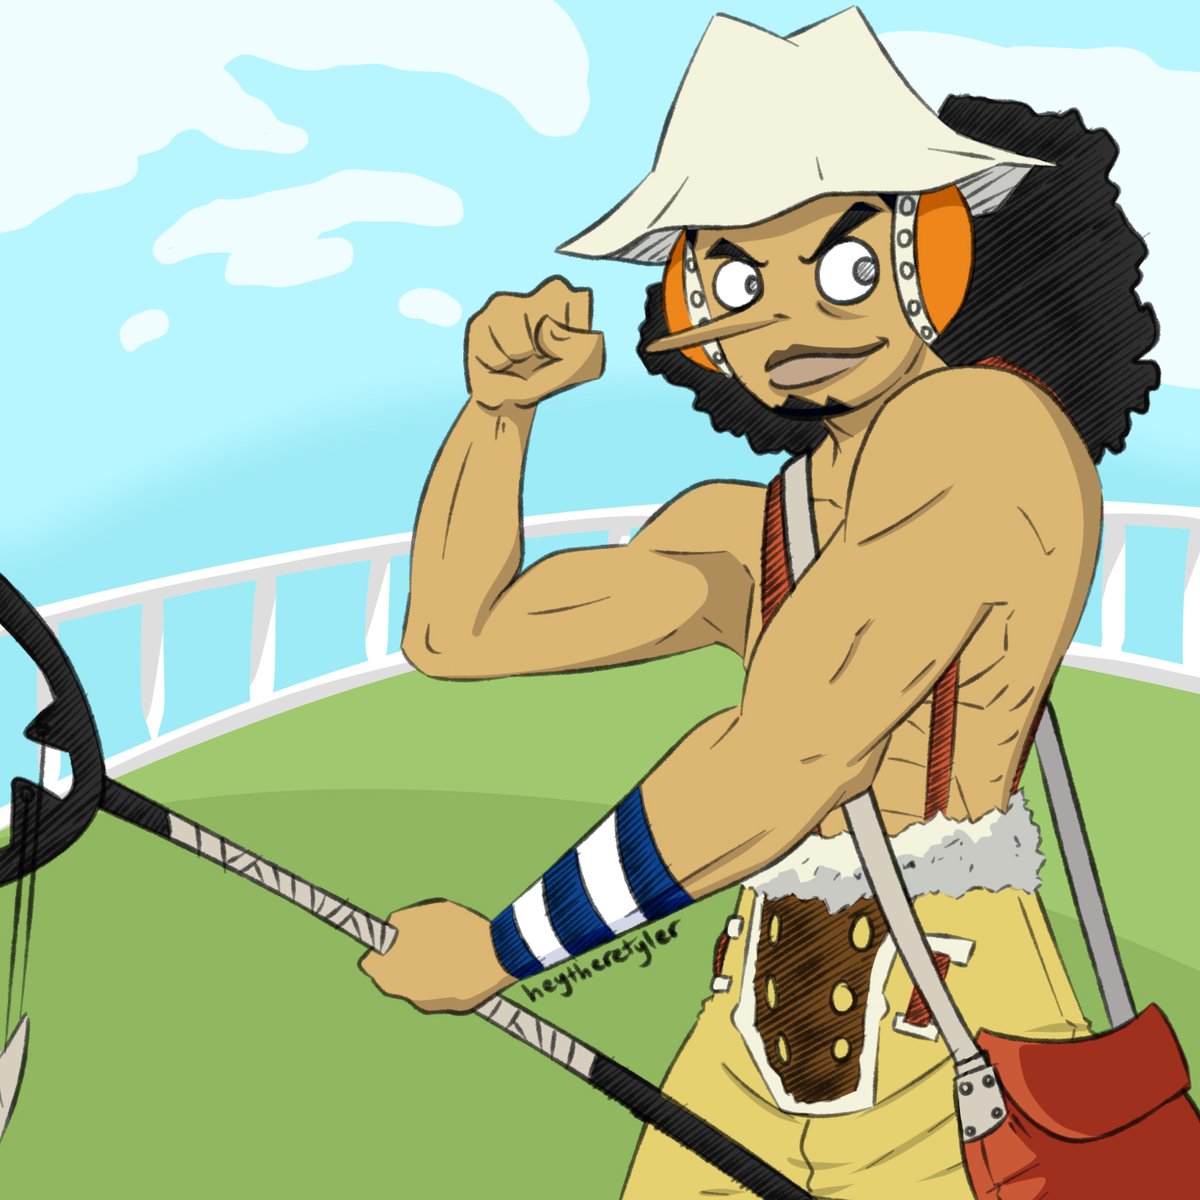 gave the usopp daily doodle some quick color